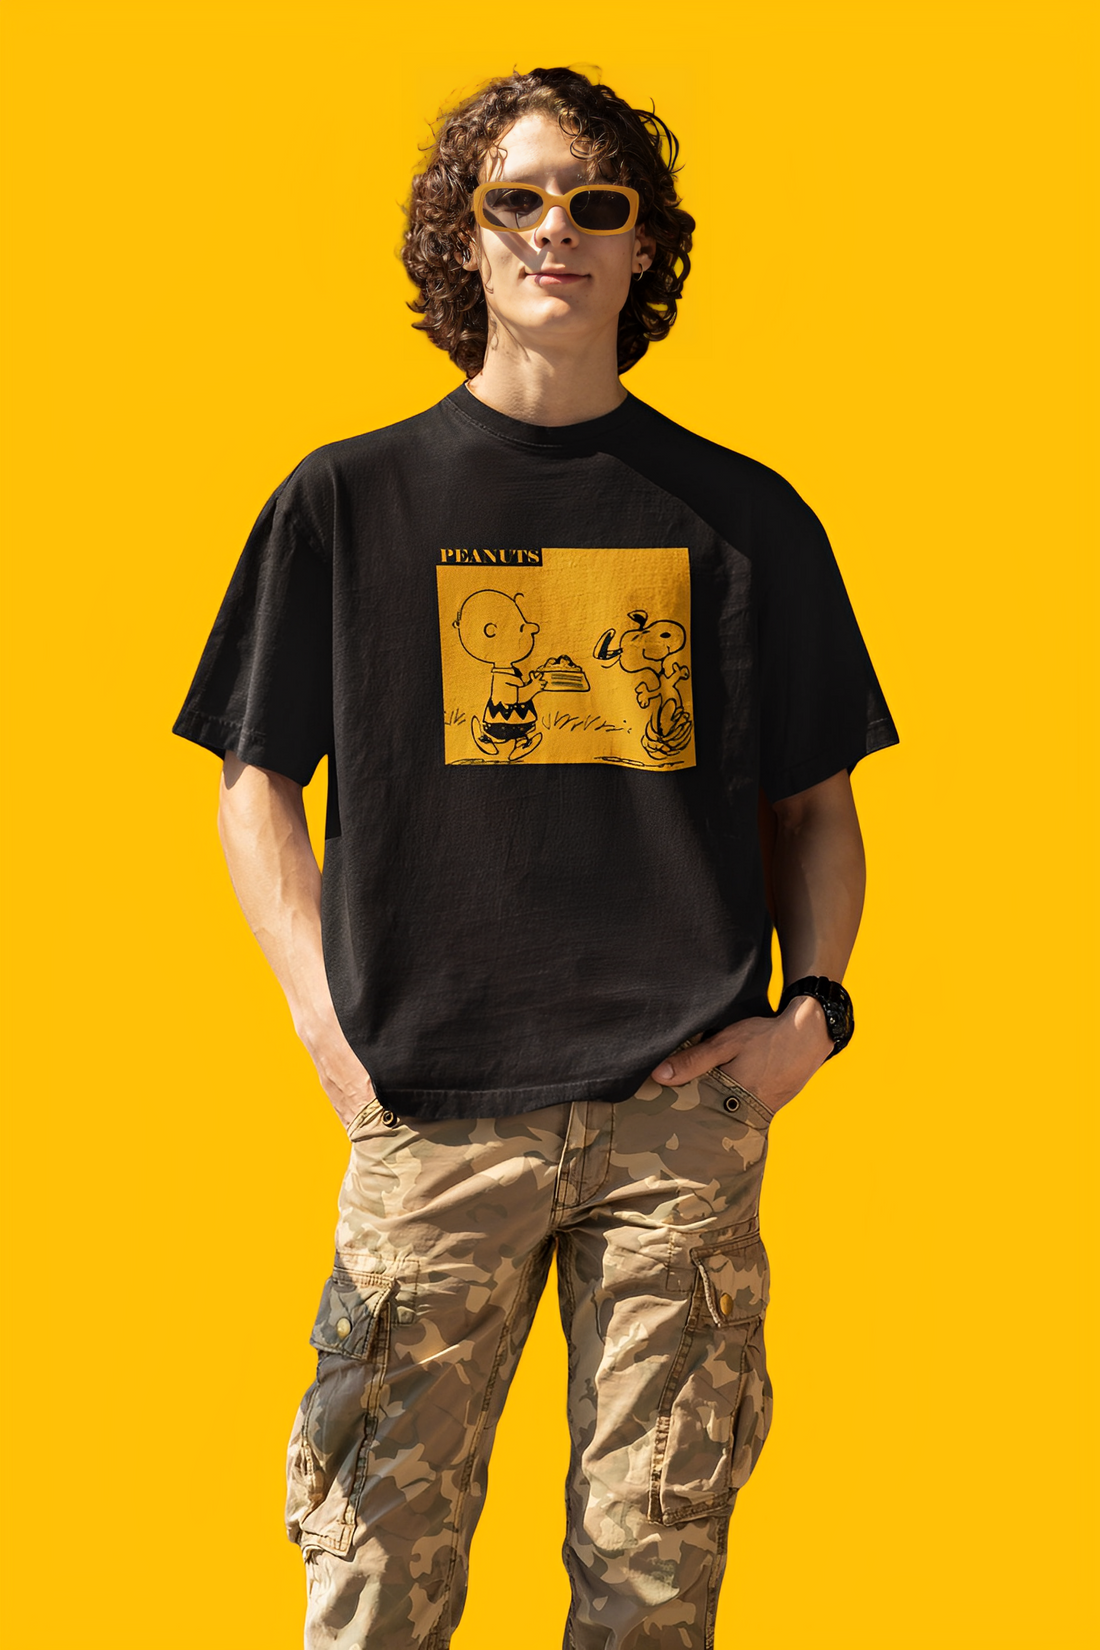 Get Nutty with Peanuts! Black Cotton Oversized Tee by Bwolves